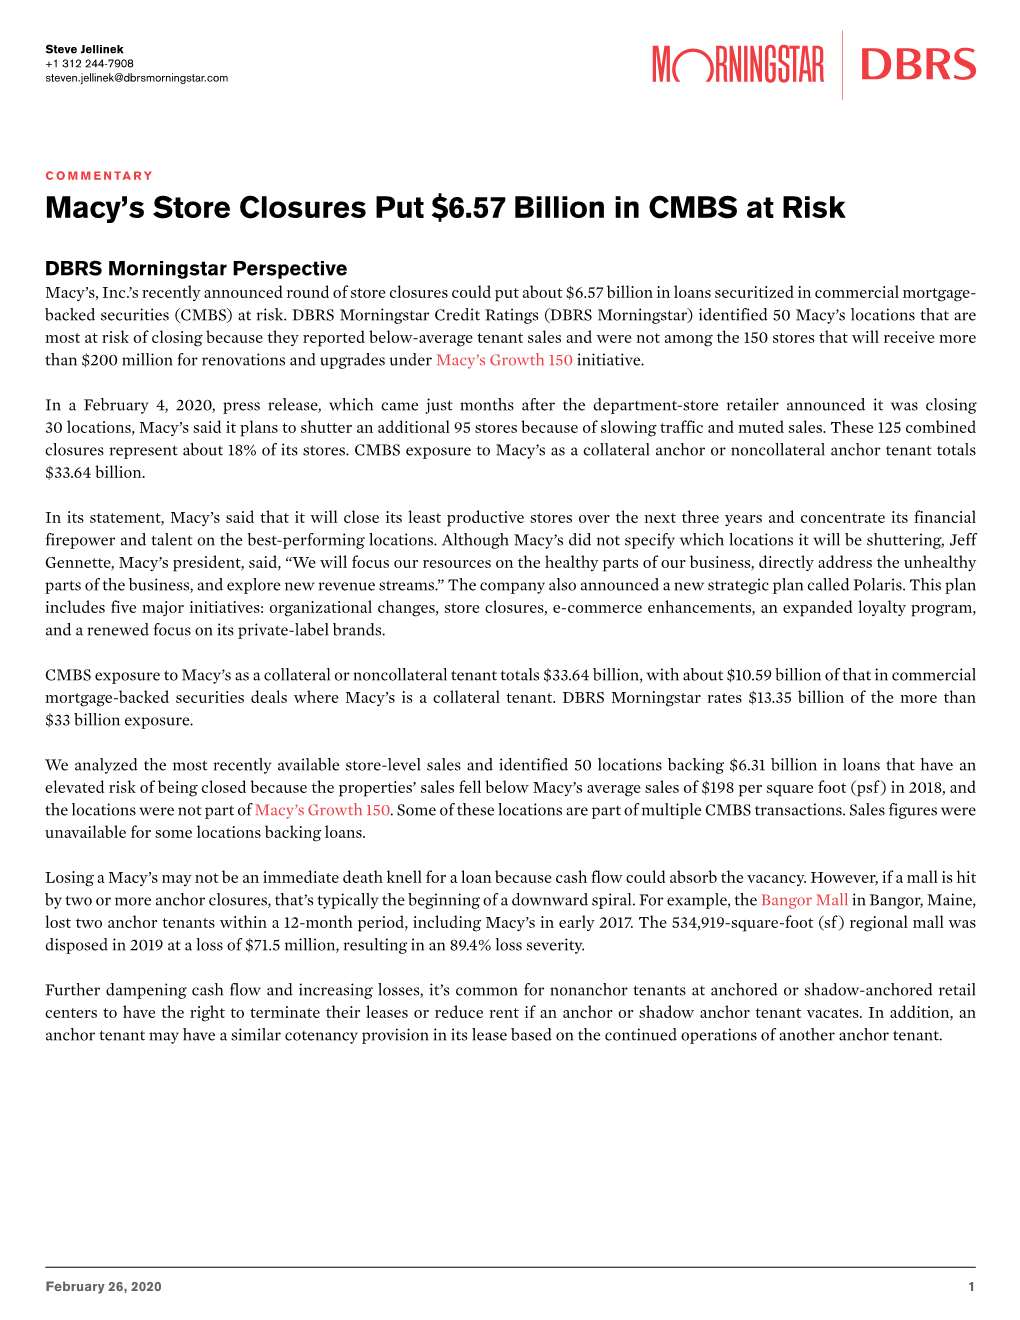 Macy's Store Closures Put $6.57 Billion in CMBS at Risk